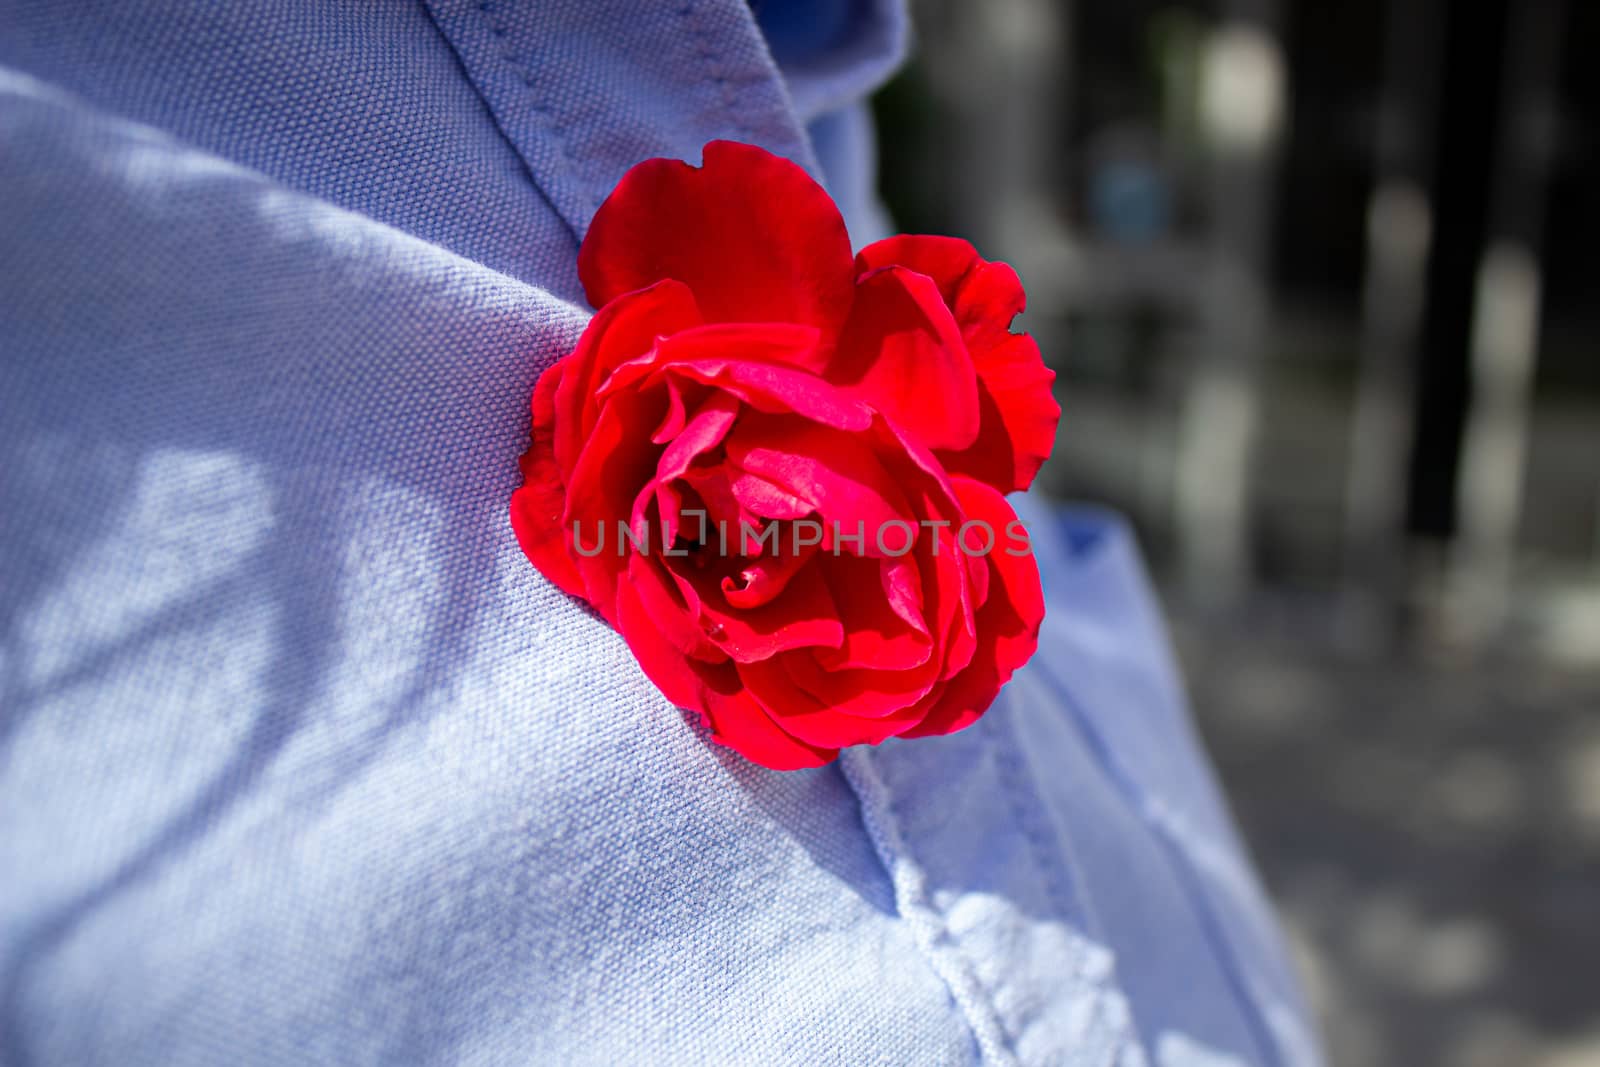 You are inside my heart - motivation inspiration quote of love. Red rose on background of blue denim shirt. still life with rose flower. Valentine's day greeting concept.